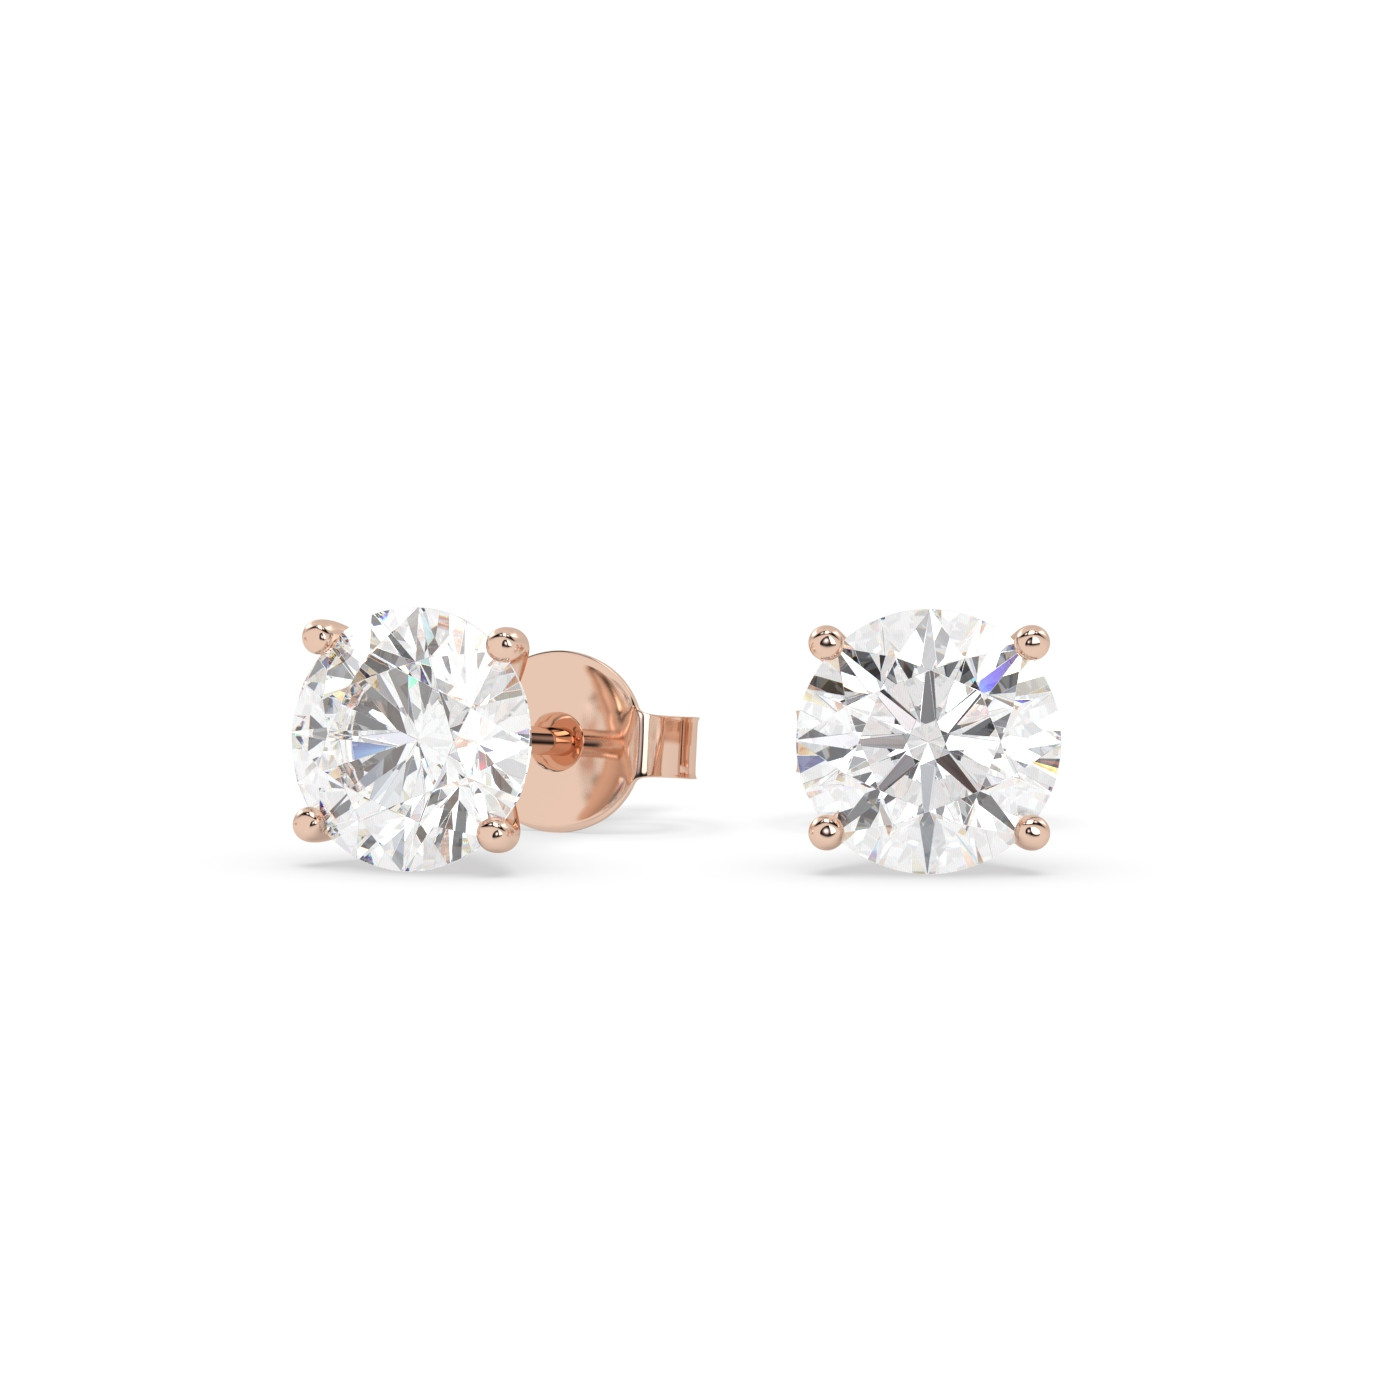 18k rose gold  1.4carat round stud earrings with butterfly back